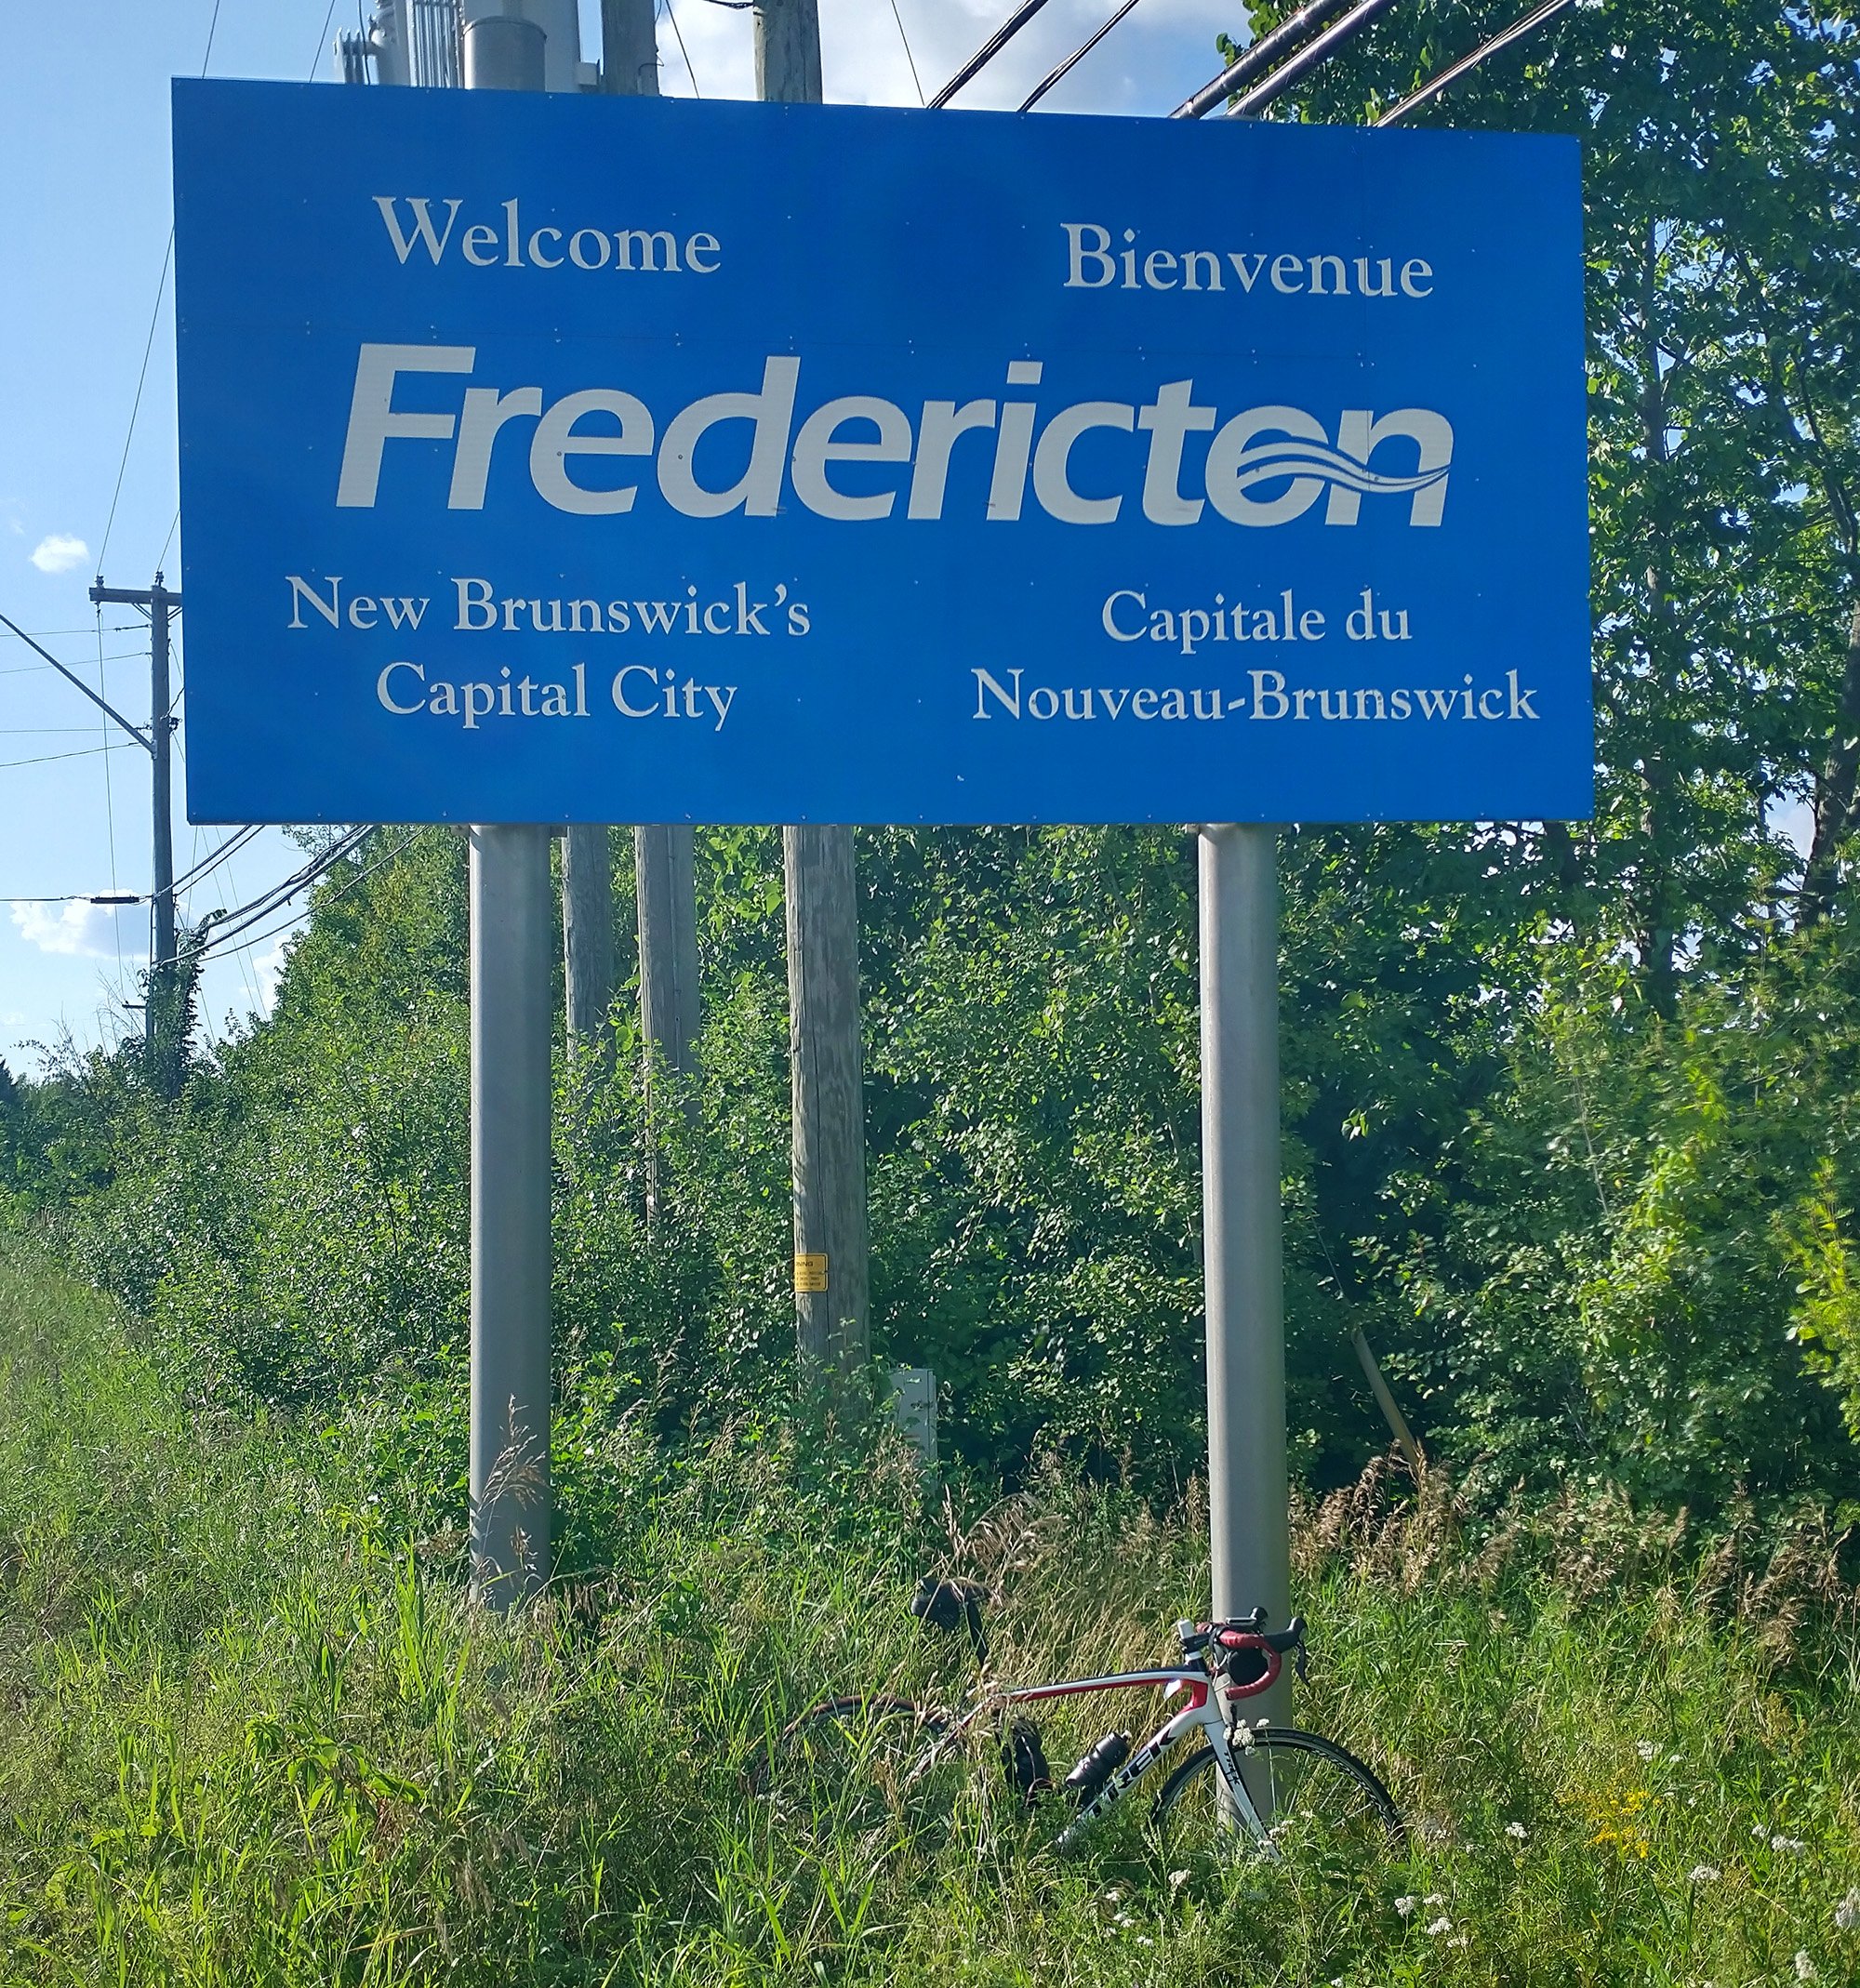 Even their town sign is bland. Well I guess it's better not to lie about yourself.